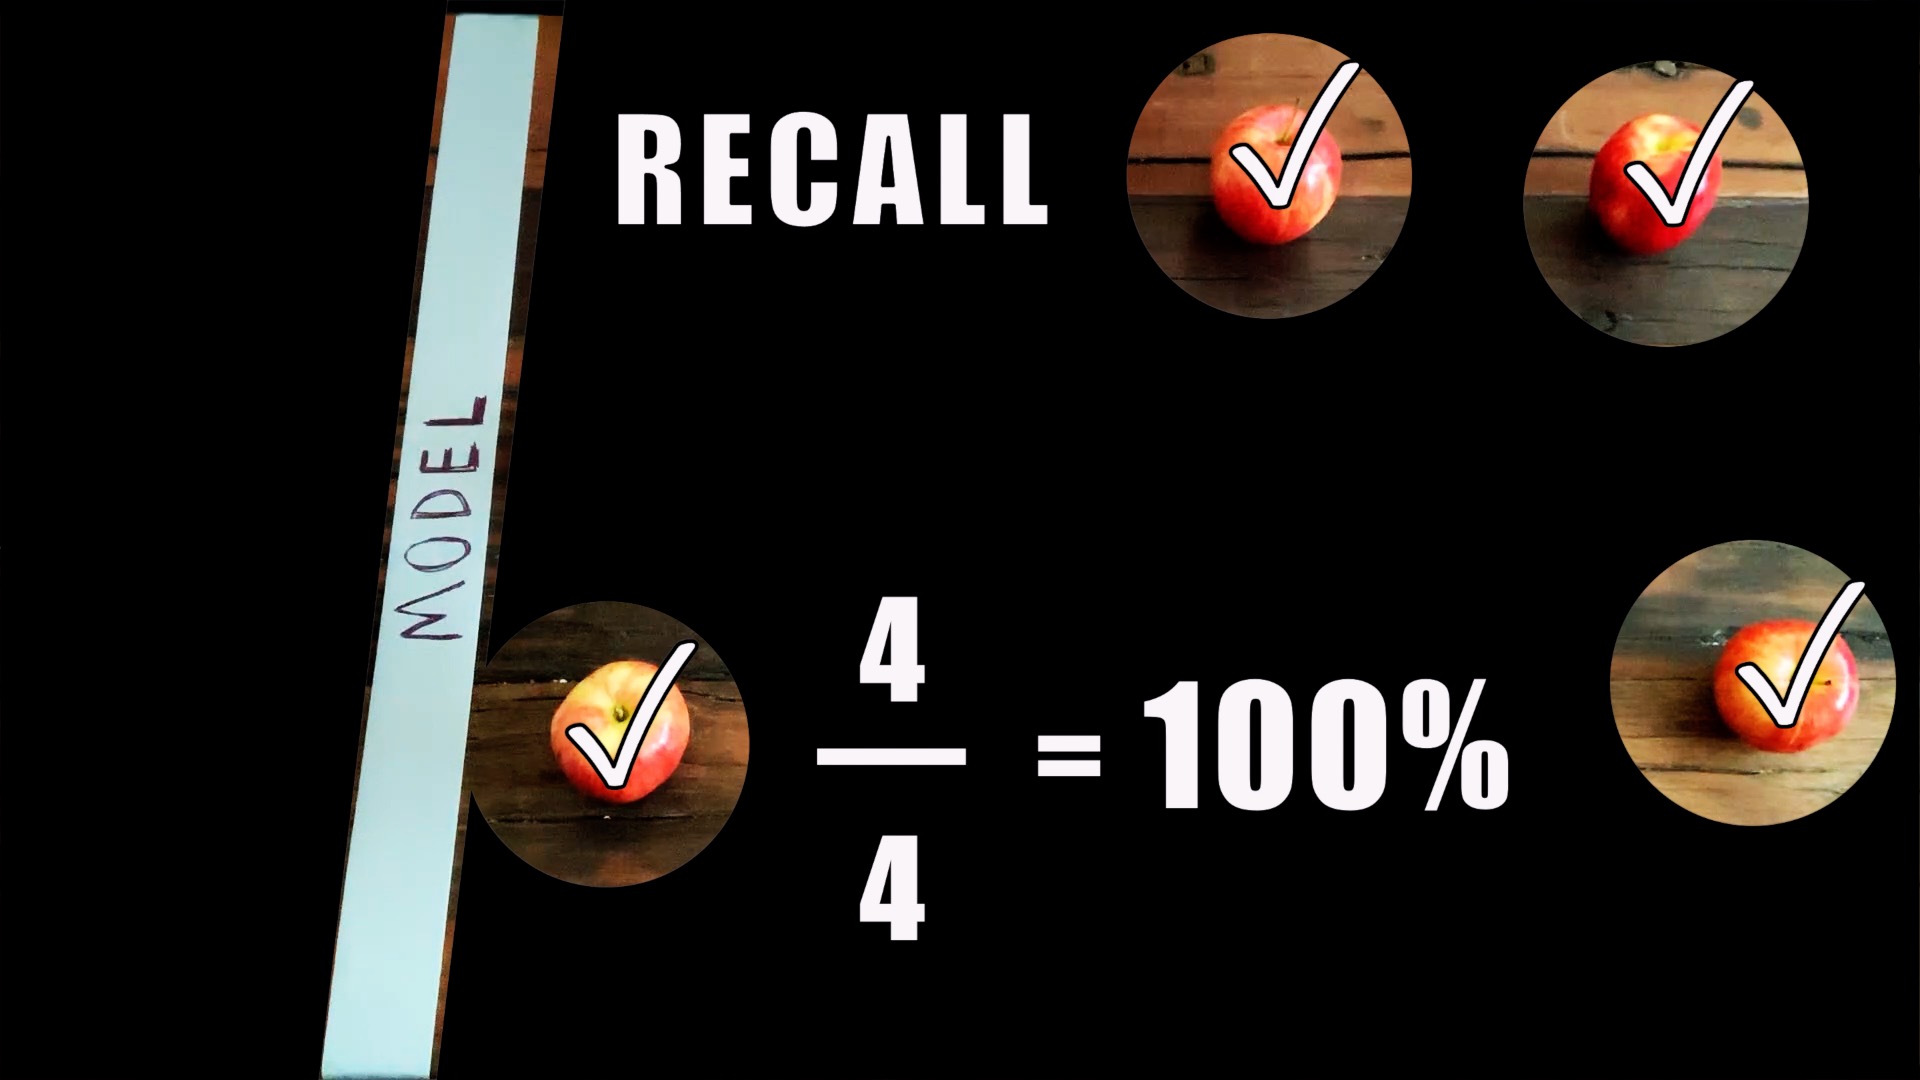 With the decision threshold decreased, recall increased to 100% for the apple class